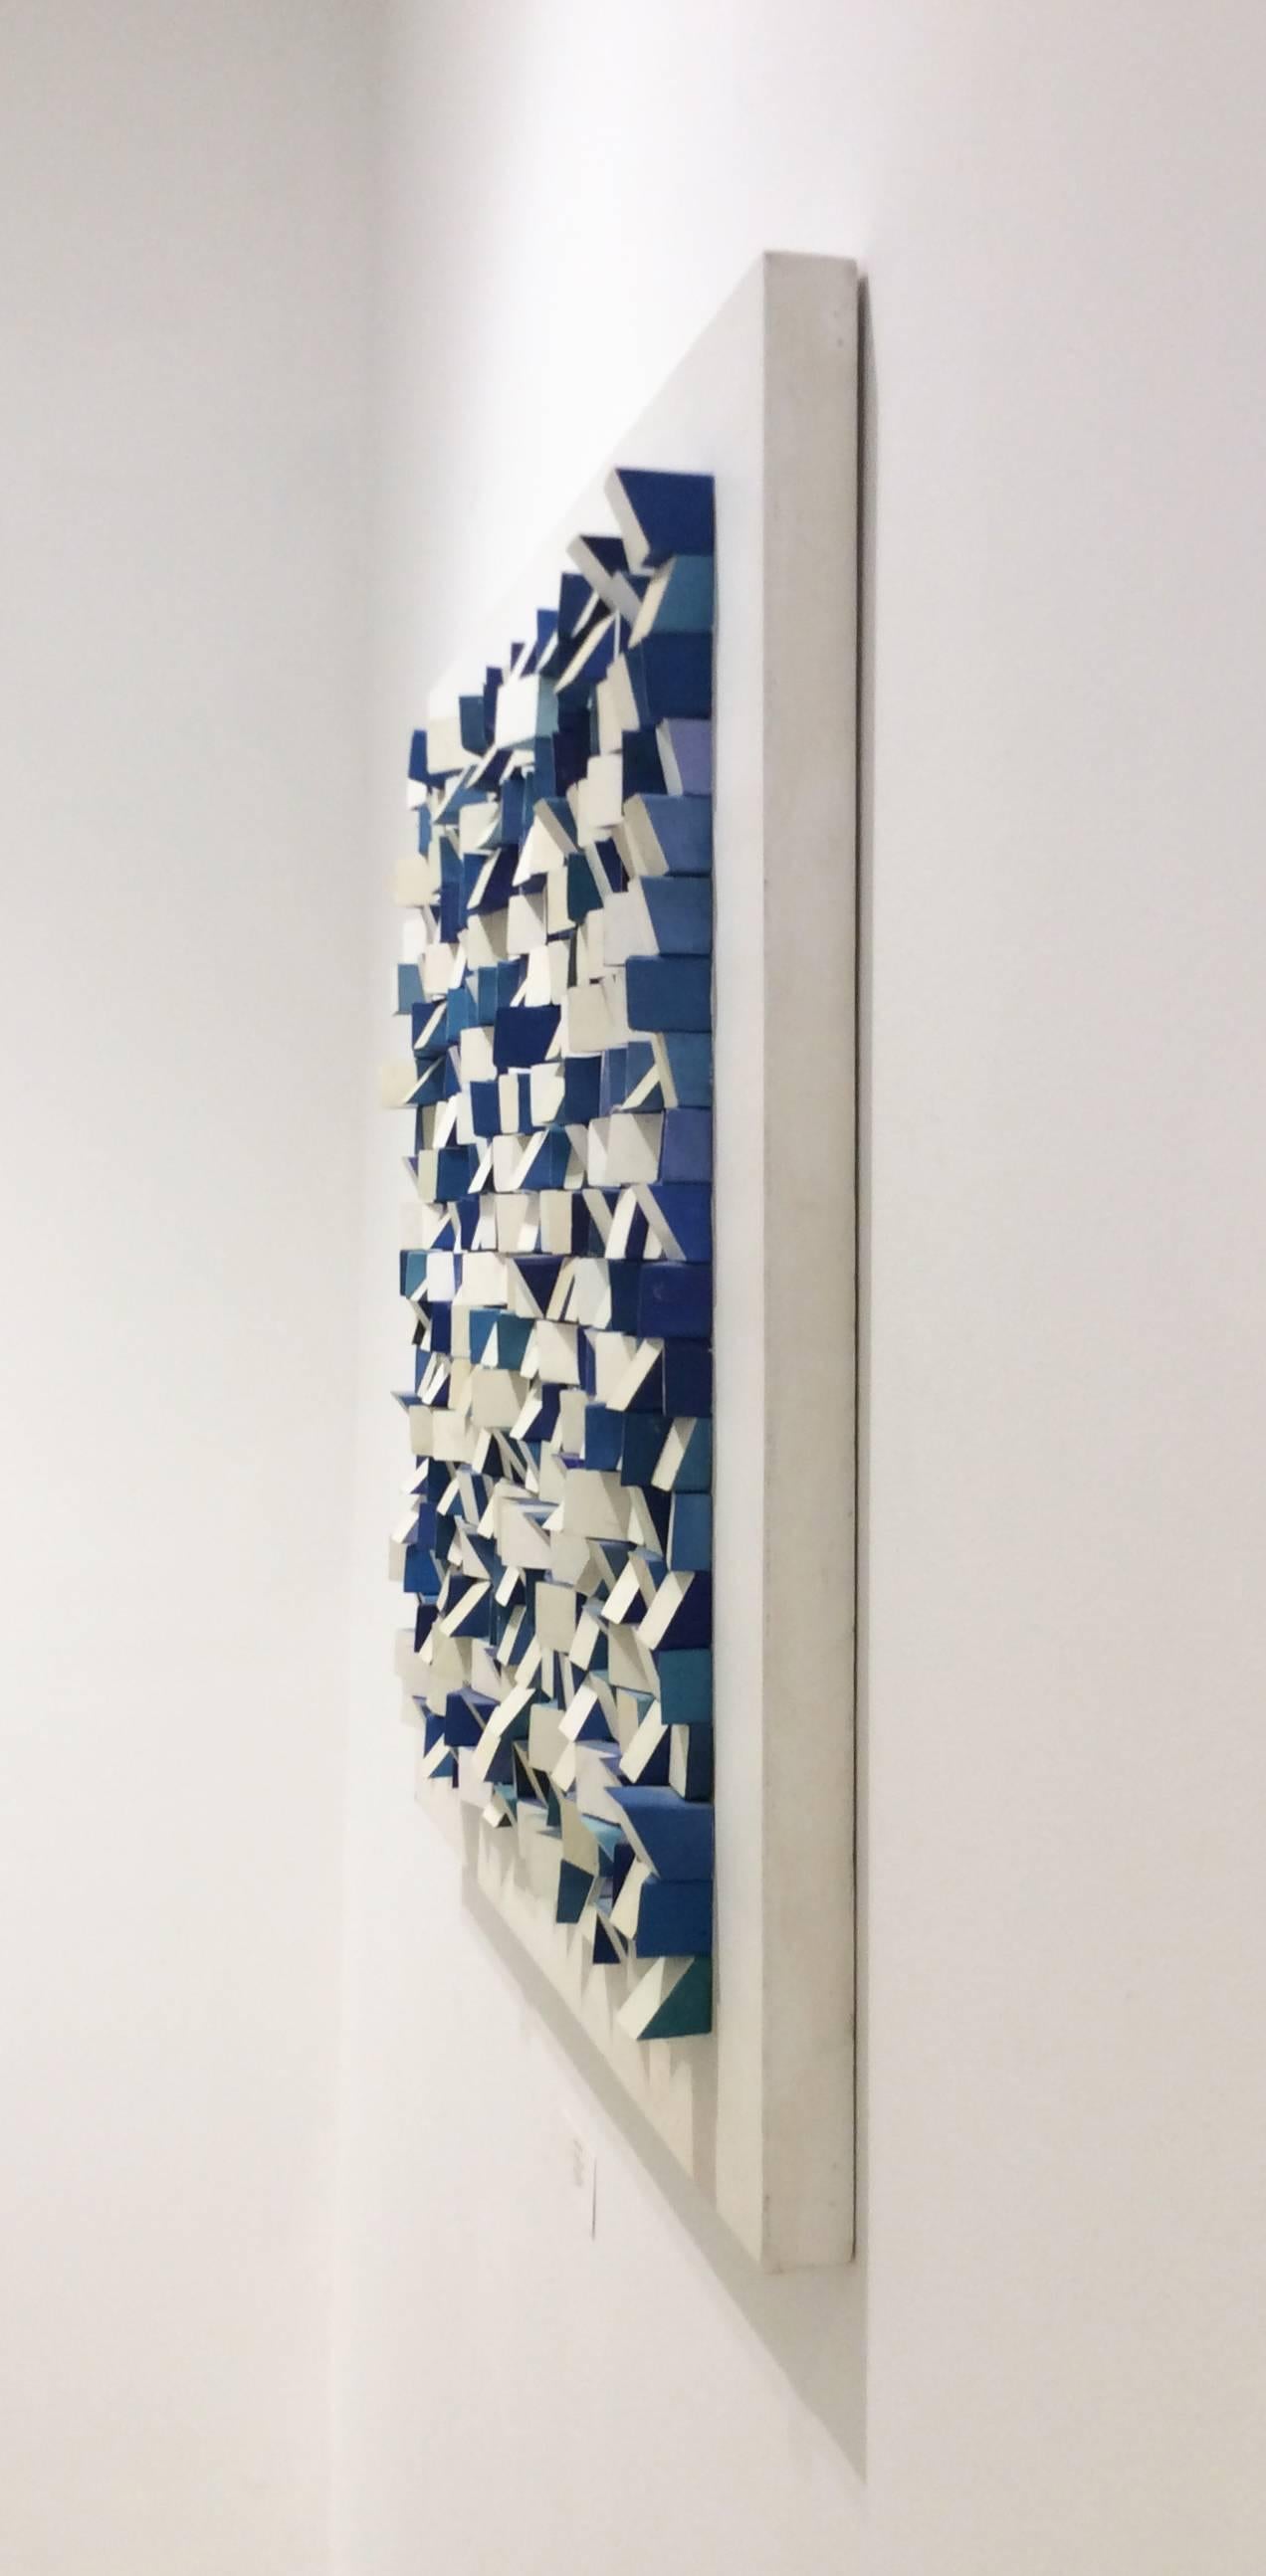 36 x 36  x 3.5 inches

Square wood blocks carefully carved and hand painted in acrylic in off-white and assorted blue hues adhered to a white painted wood panel that measures 36 x 36 inches. 

This abstract, modern three-dimensional wall sculpture